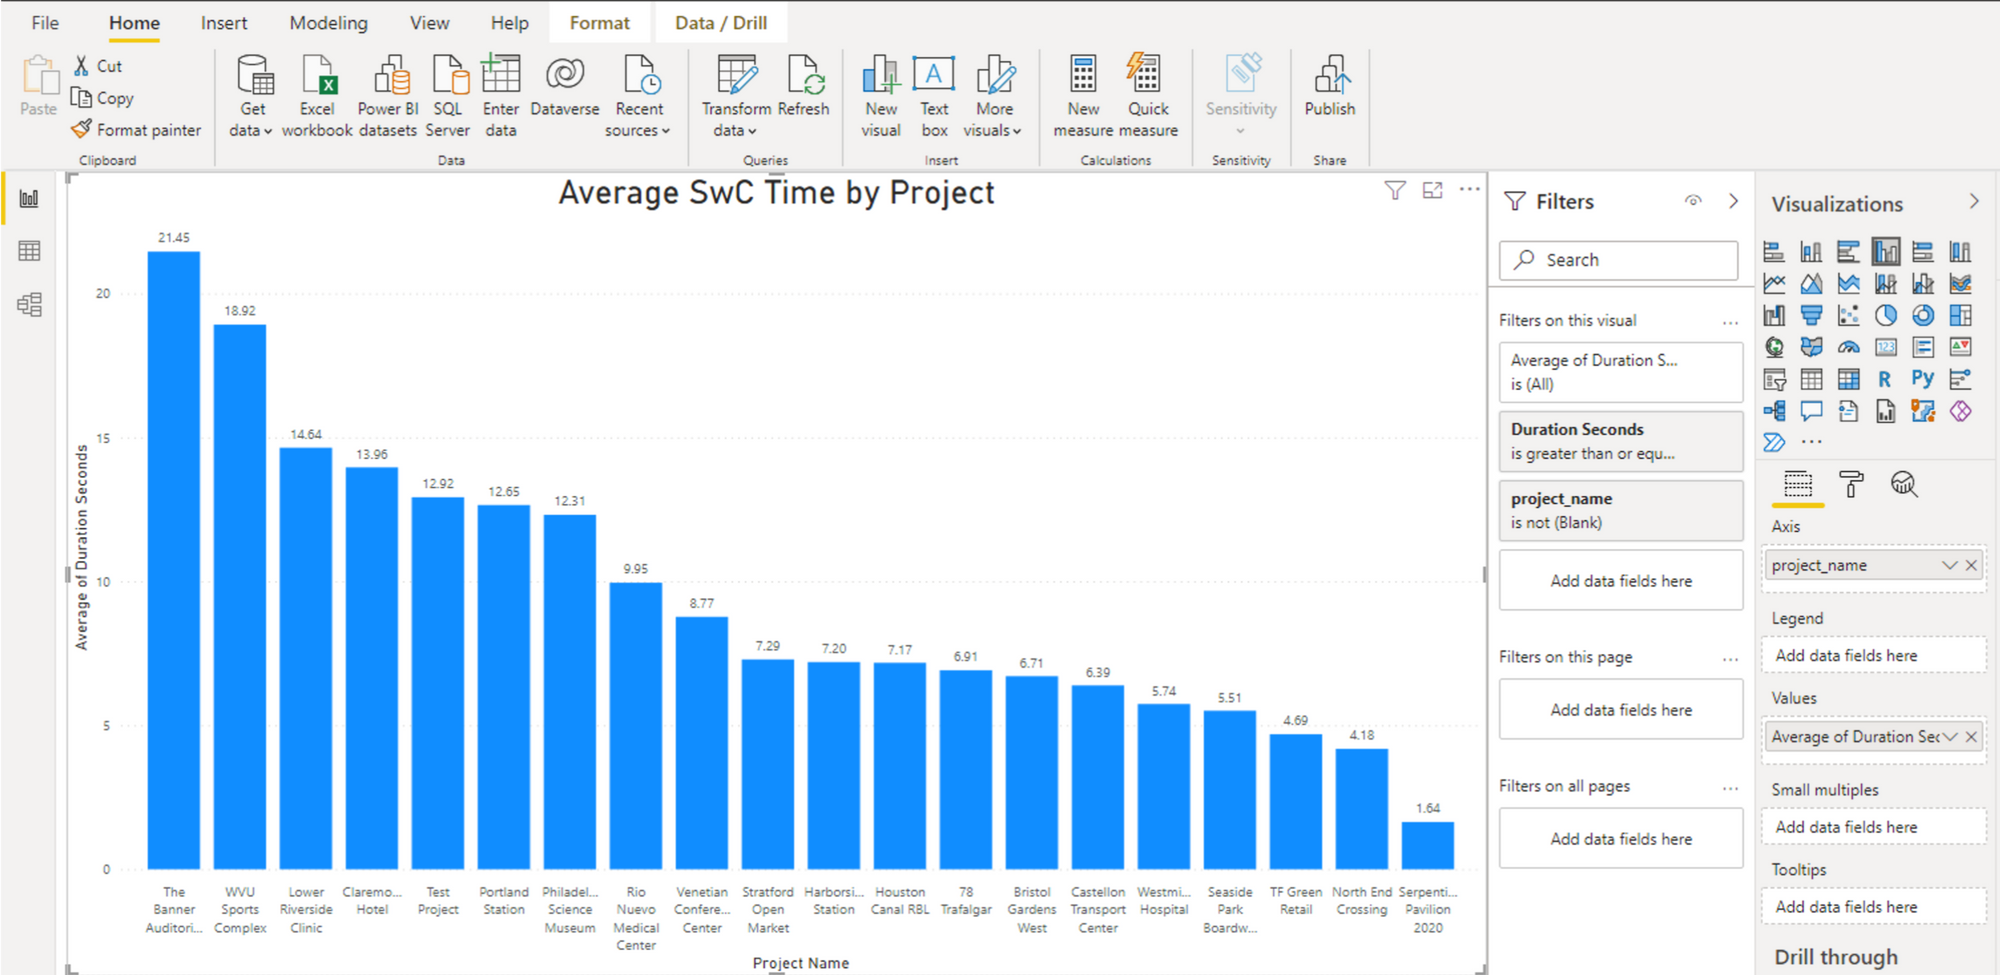 A sample report in Power BI showing Revit projects with slow sync times according to custom criteria.